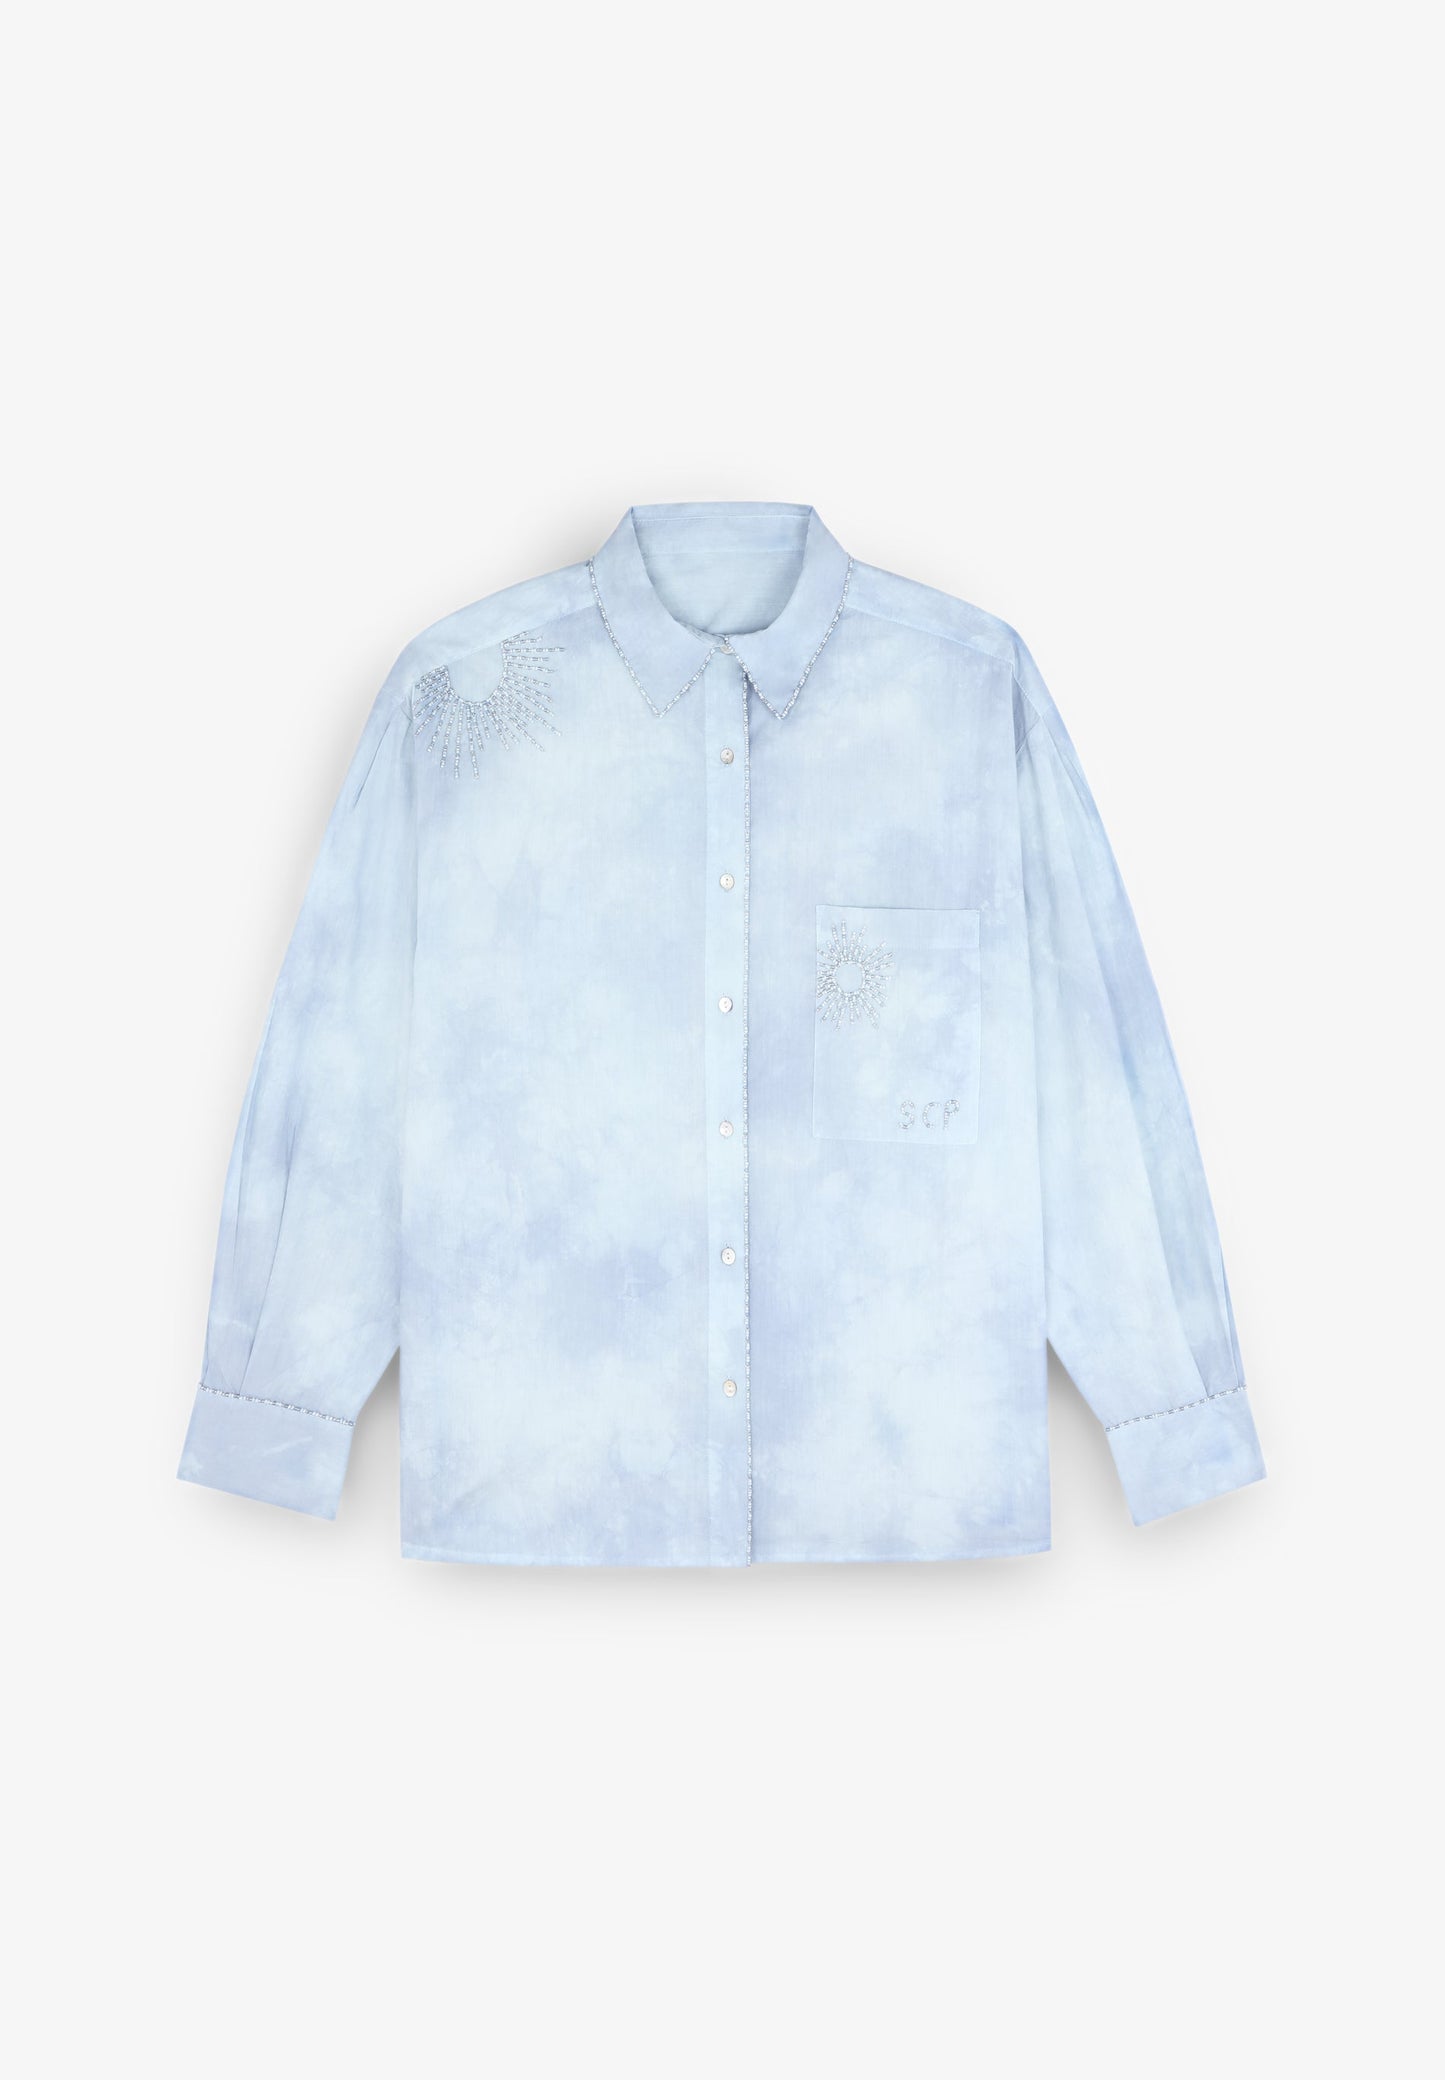 EMBROIDERED TIE-DYE SHIRT